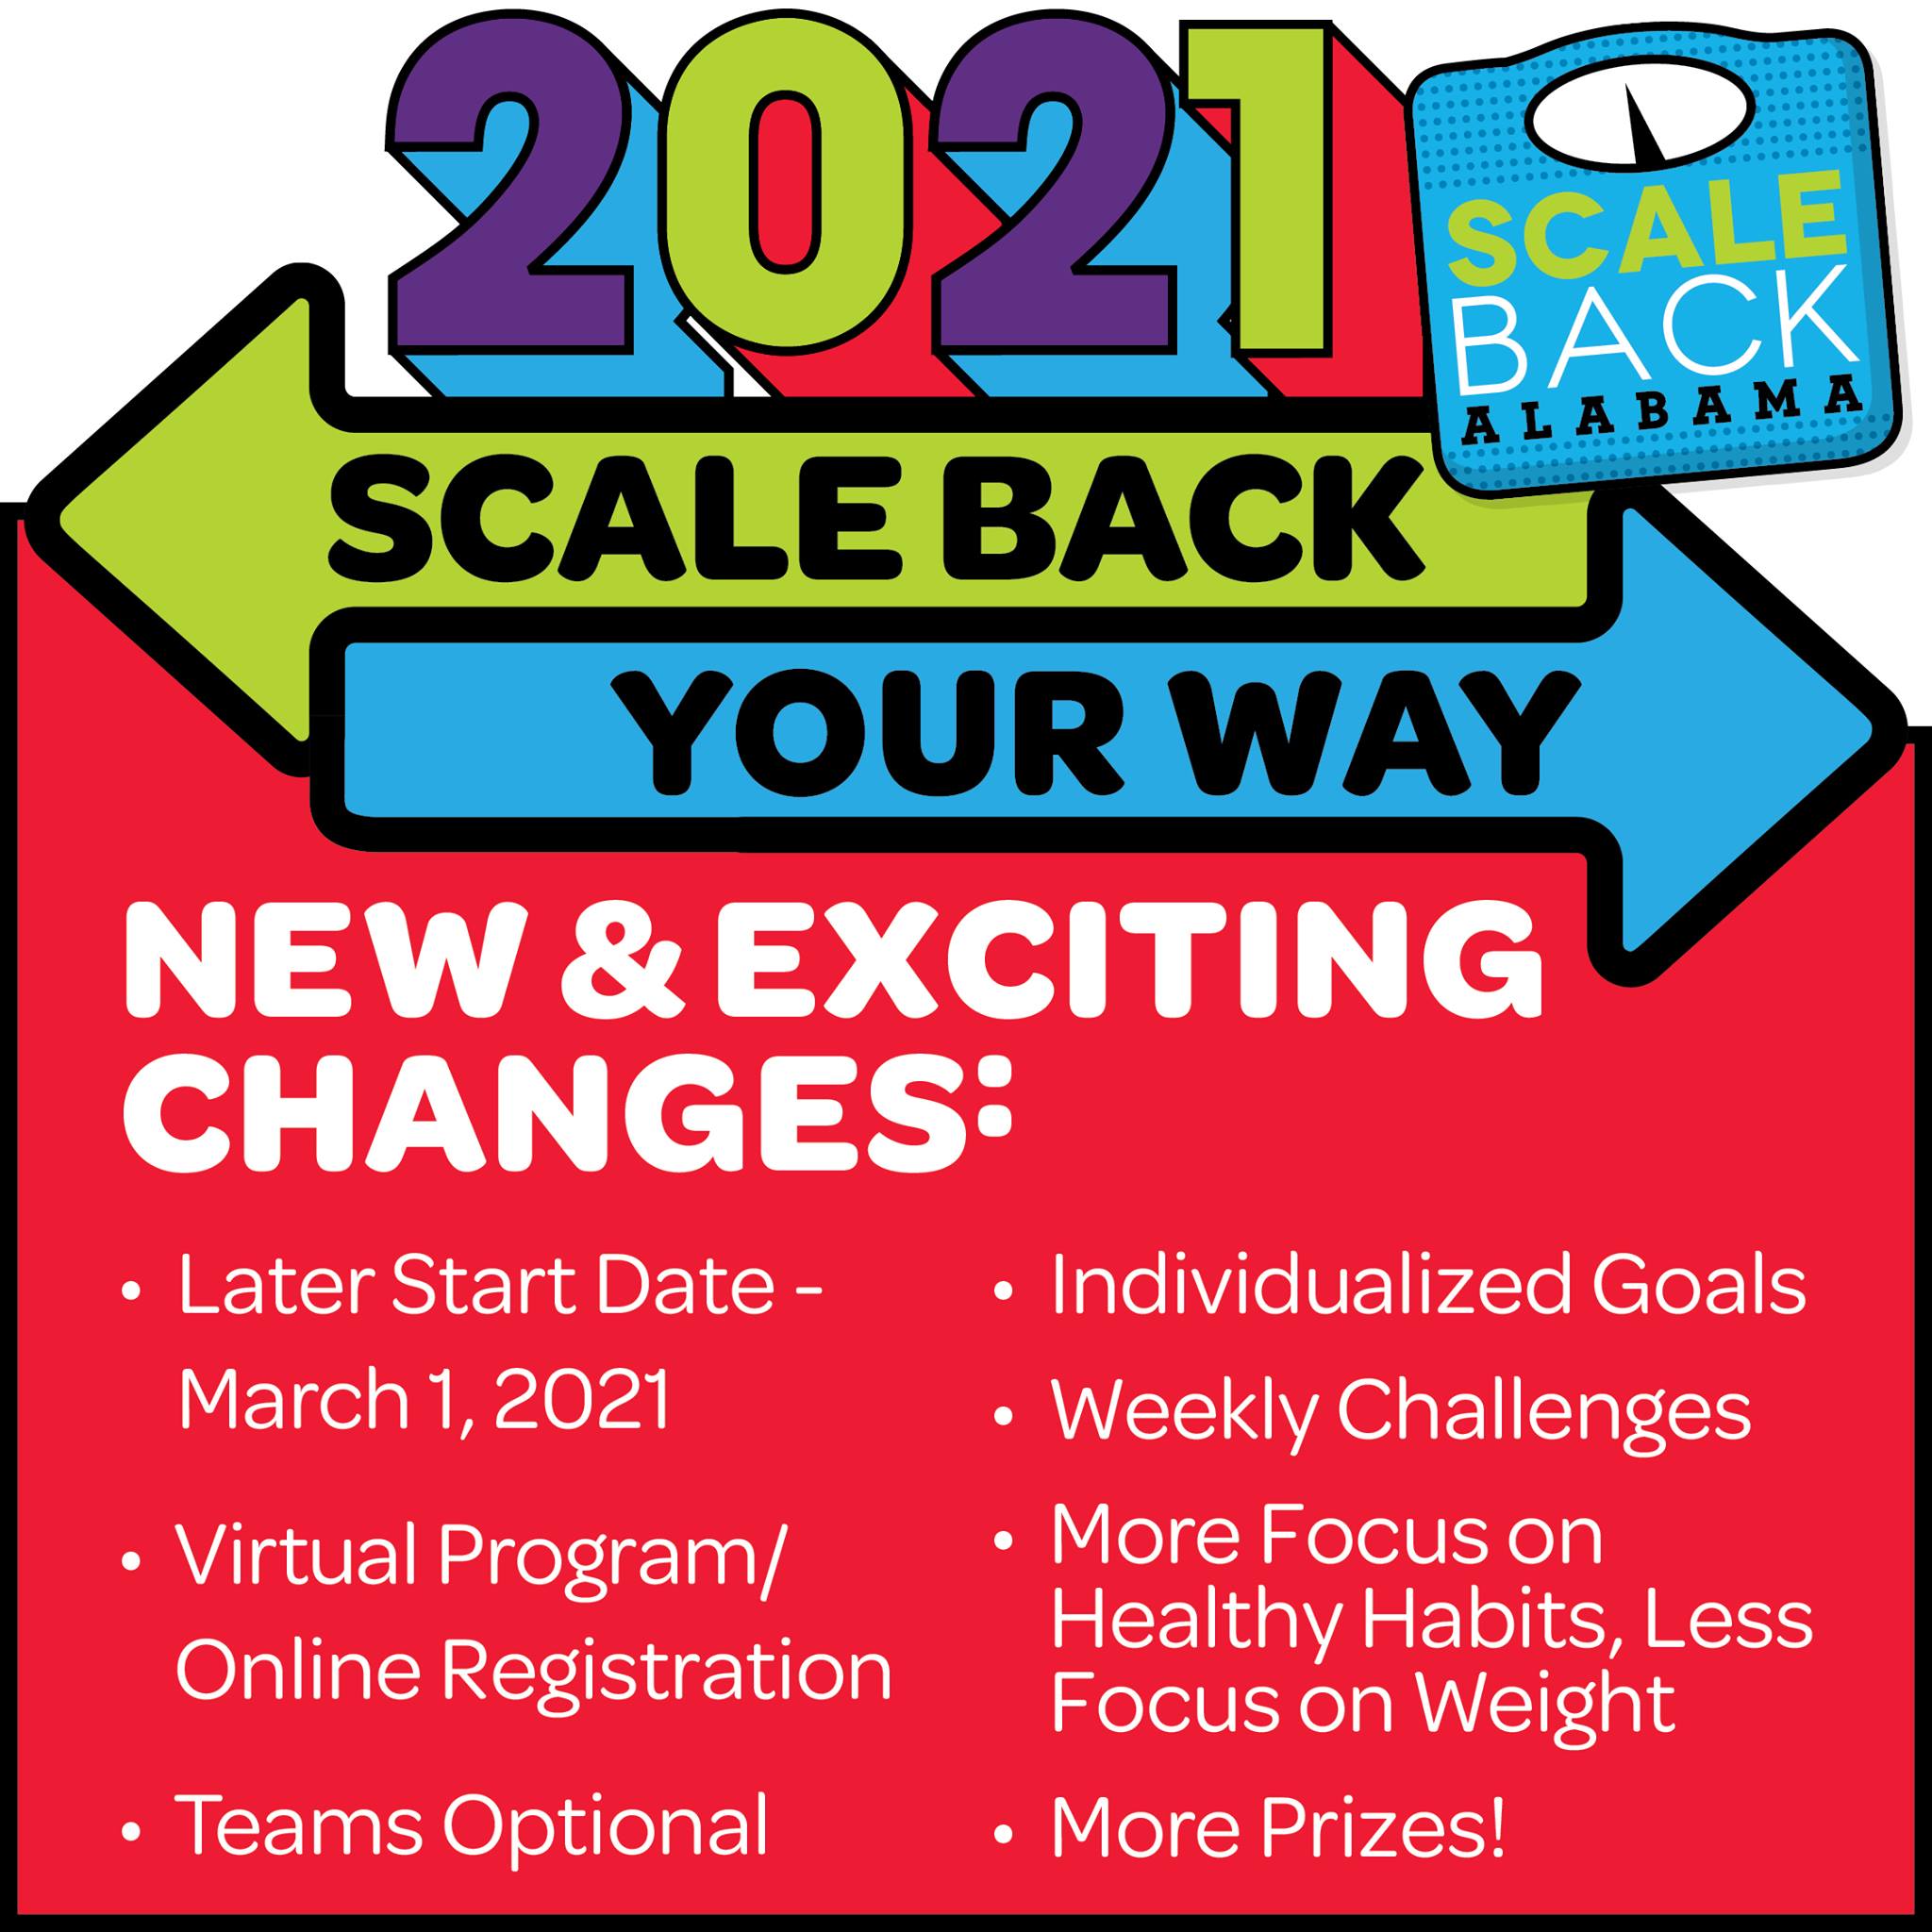 Scale Back Your Way 2021 Logo with multi-colored numbers and letters. Includes a graphic of scale with the words, "Scale Back Alabama" on top of it. Also, lists new and exciting changes which include: Later Start Date of March 1, 2021, Virtual Program/Online Registration, Teams Optional, Individualized Goals, Weekly Challenges, More Focus on Healthy Habits, Less Focus on Weight, and More Prizes.